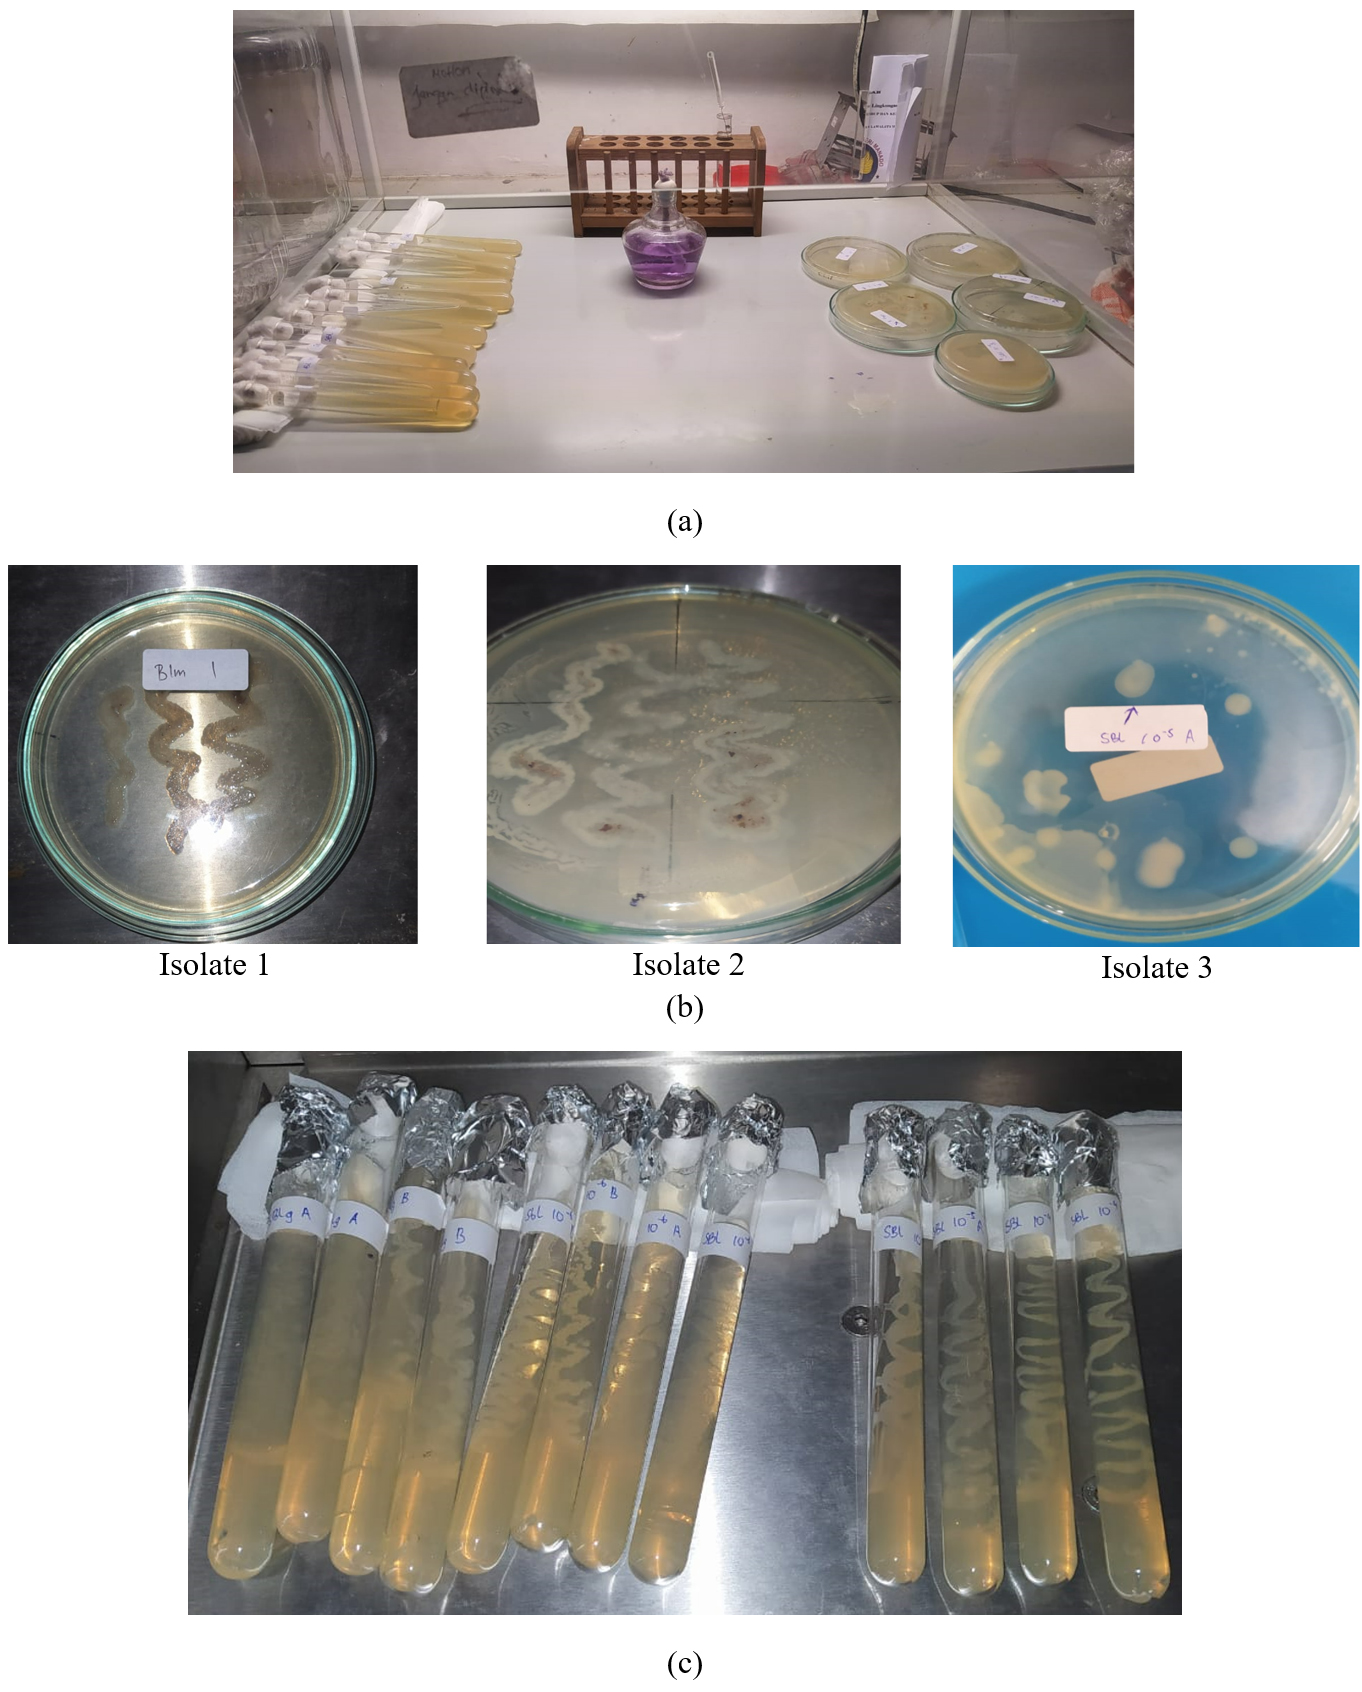 A collection of bacterial isolates from the pig intestine reveals